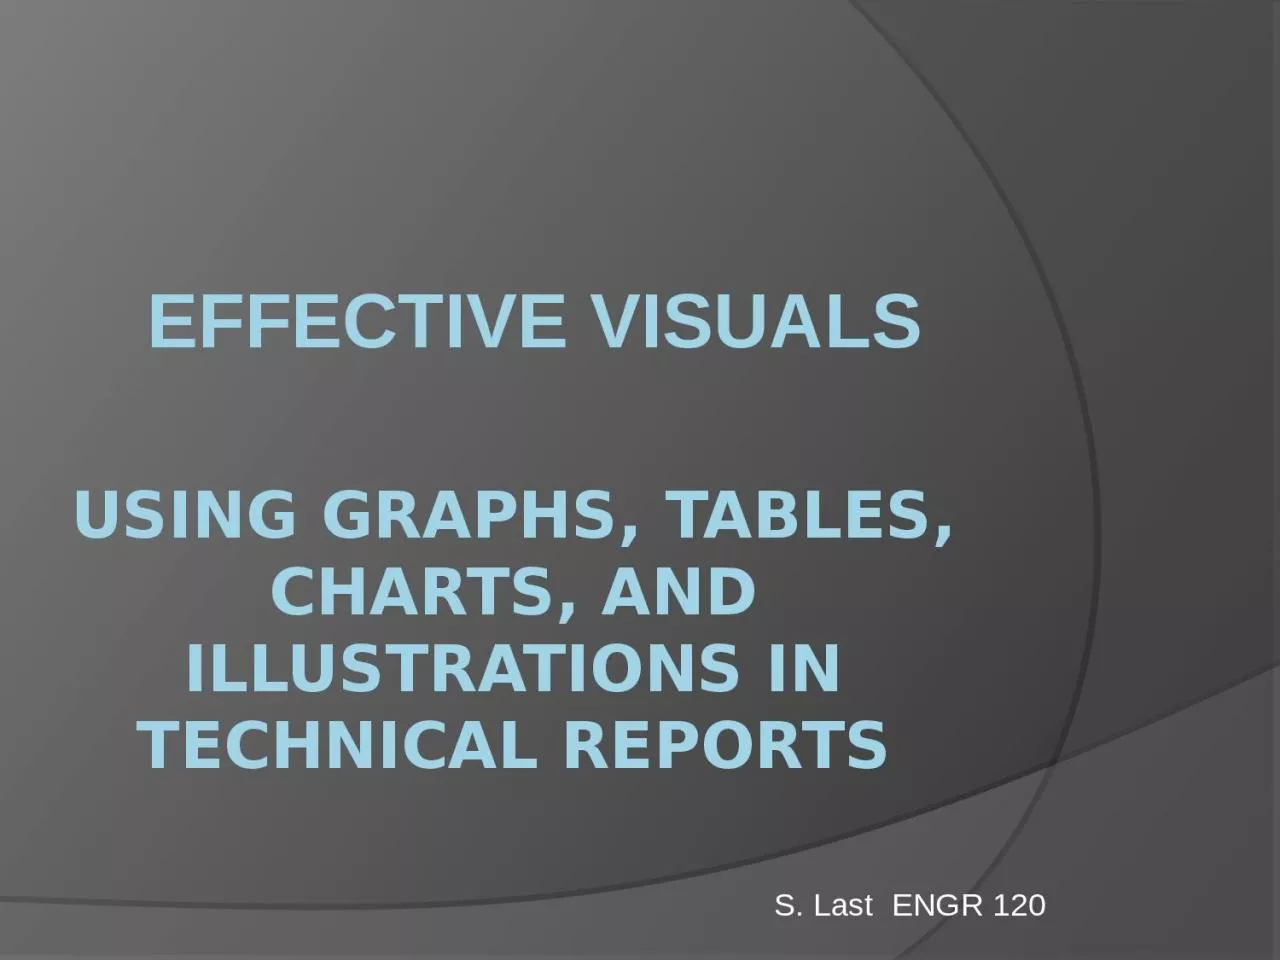 Effective  Visuals  Using Graphs, Tables, Charts, and illustrations in Technical Reports